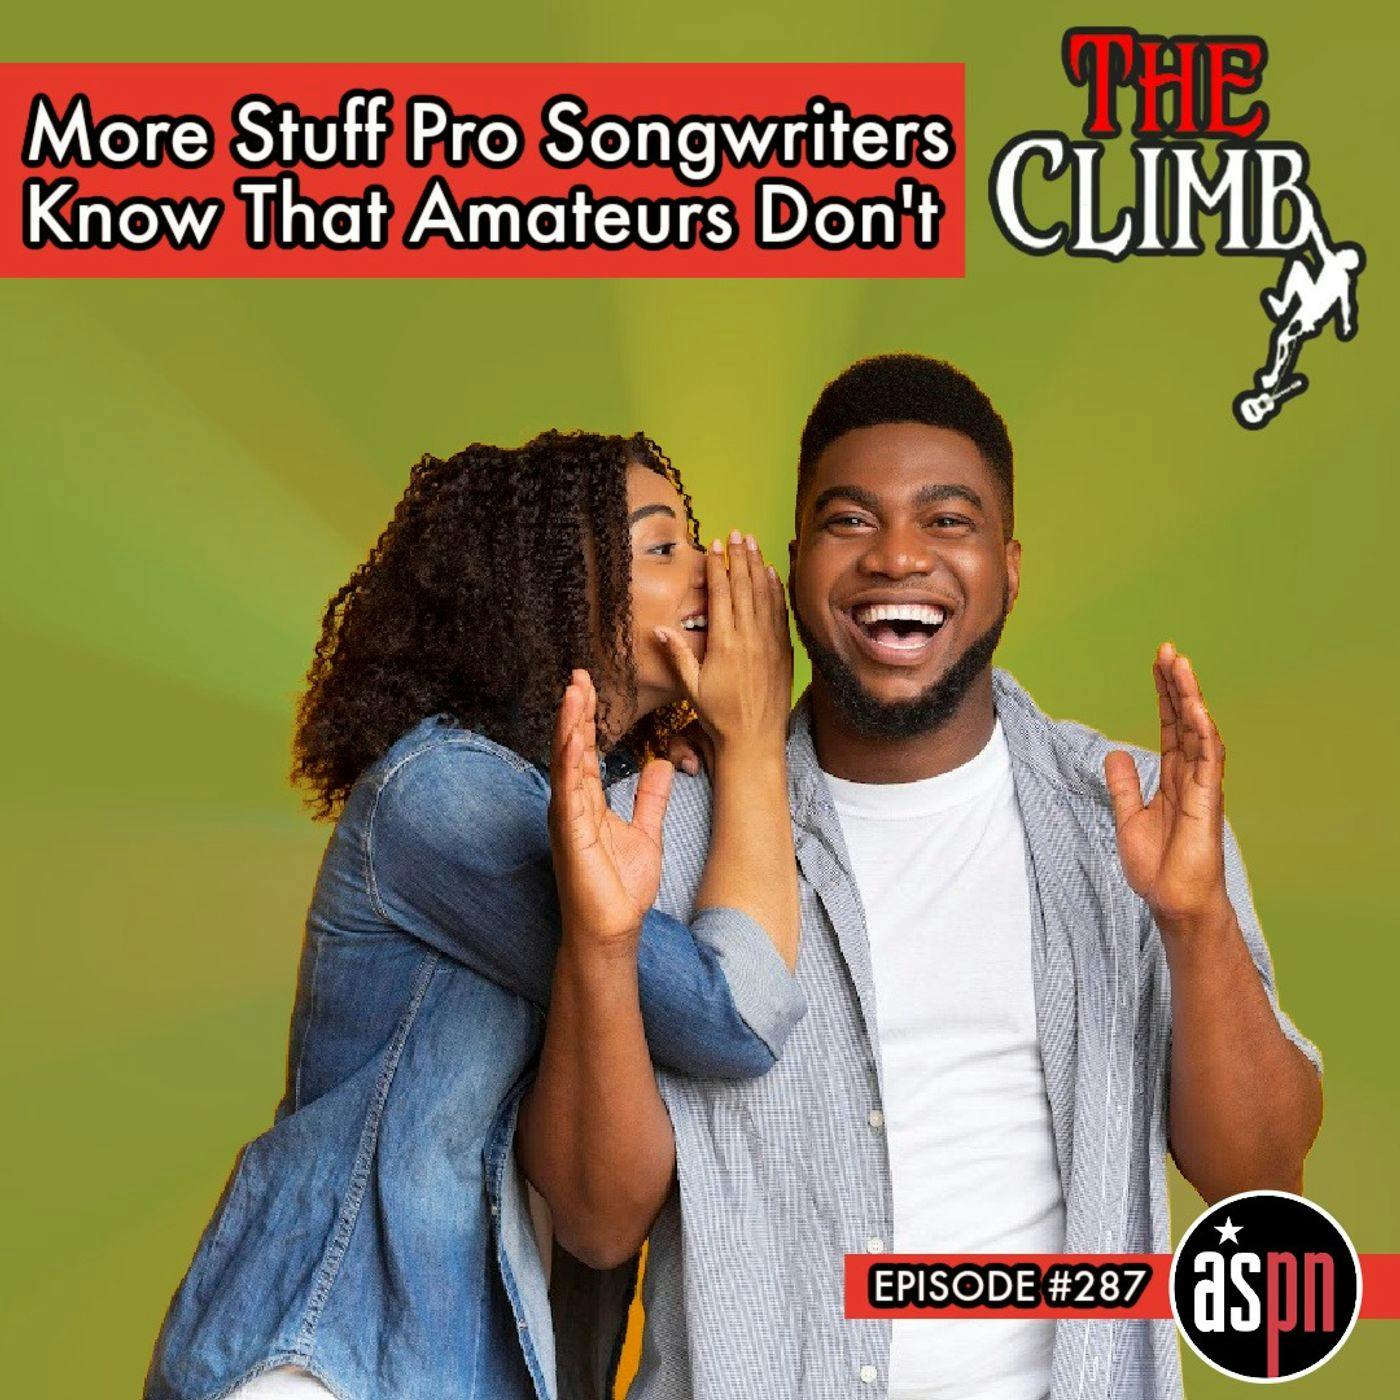 Episode #287: More Stuff Pro Songwriters Know That Amateurs Don't